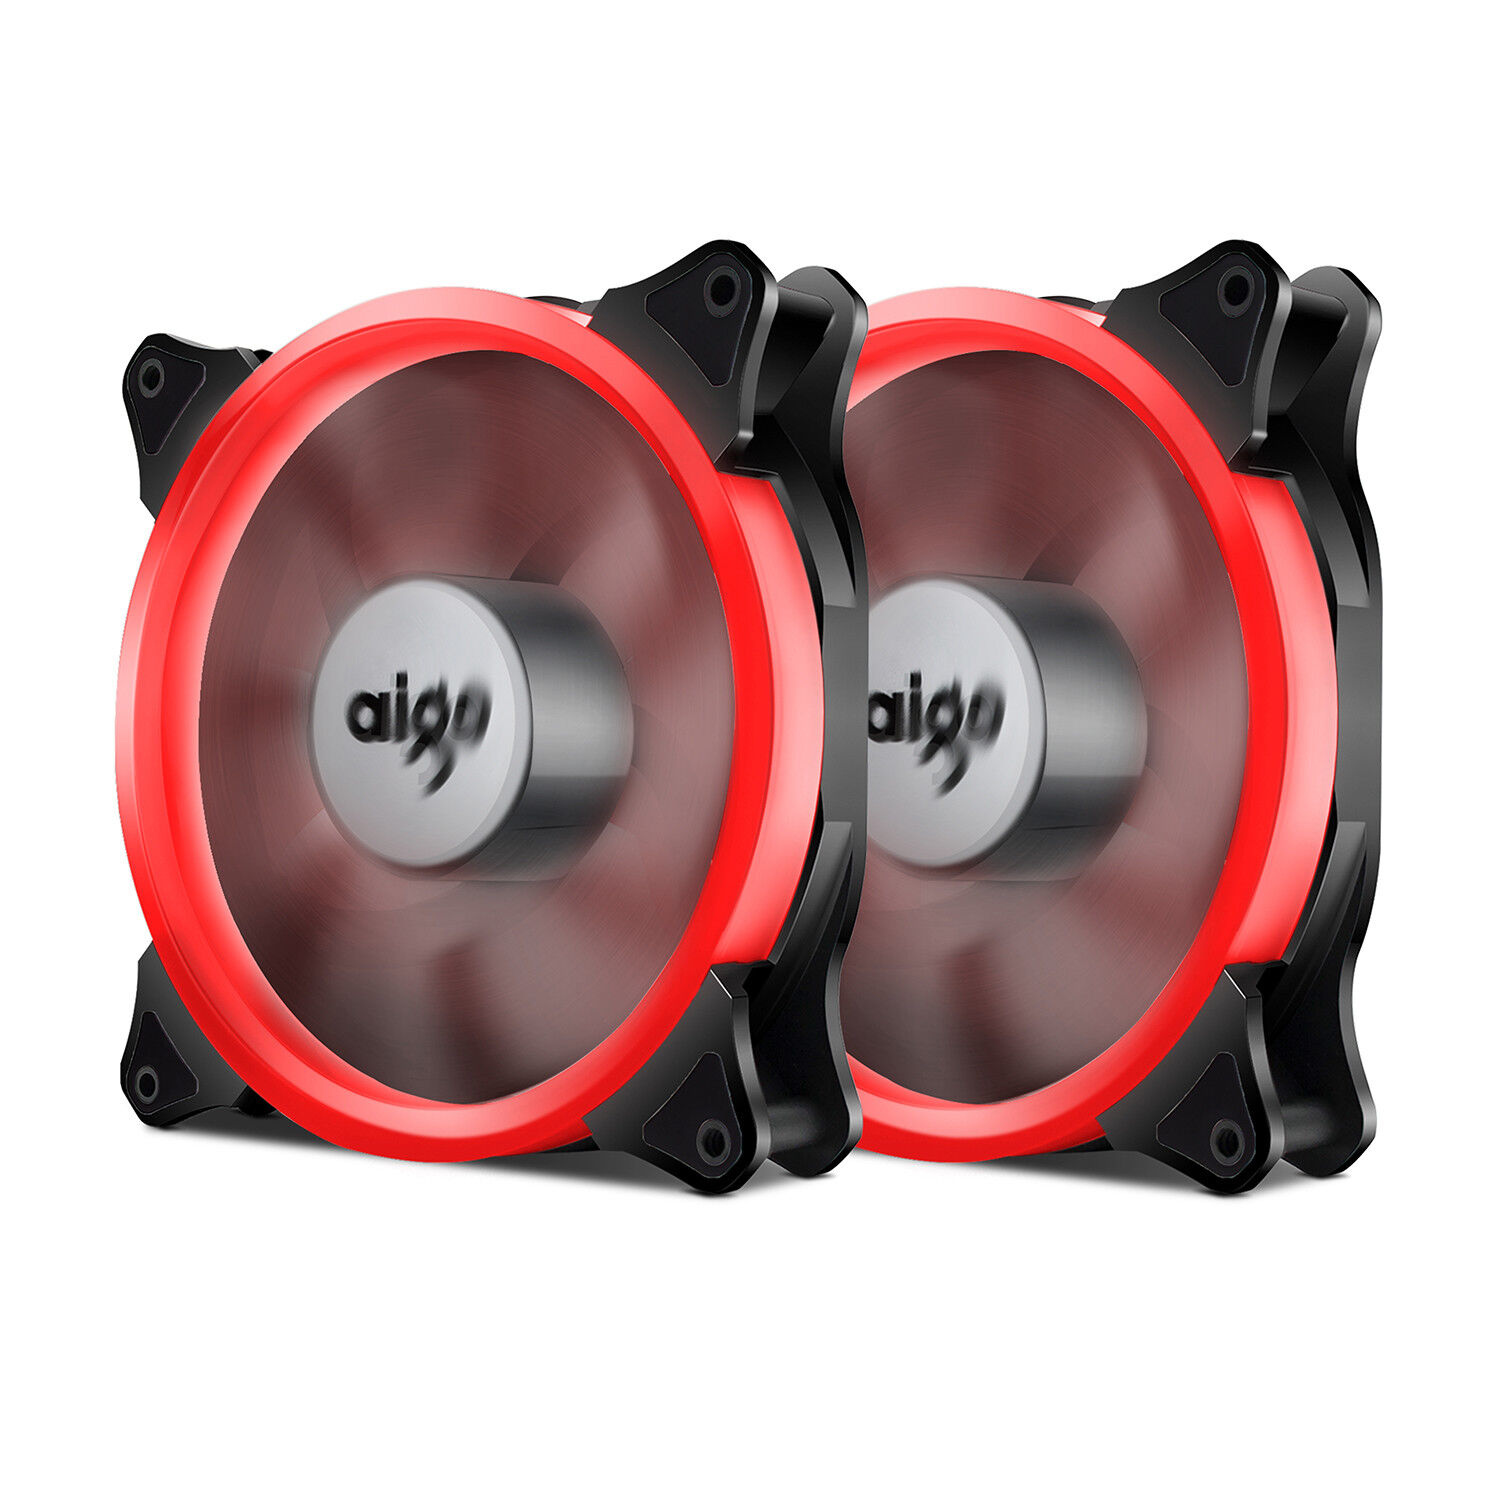 2 Pcs Aigo 140mm Red Halo LED PC Computer Case Cooling Ring Clear Silence Fan